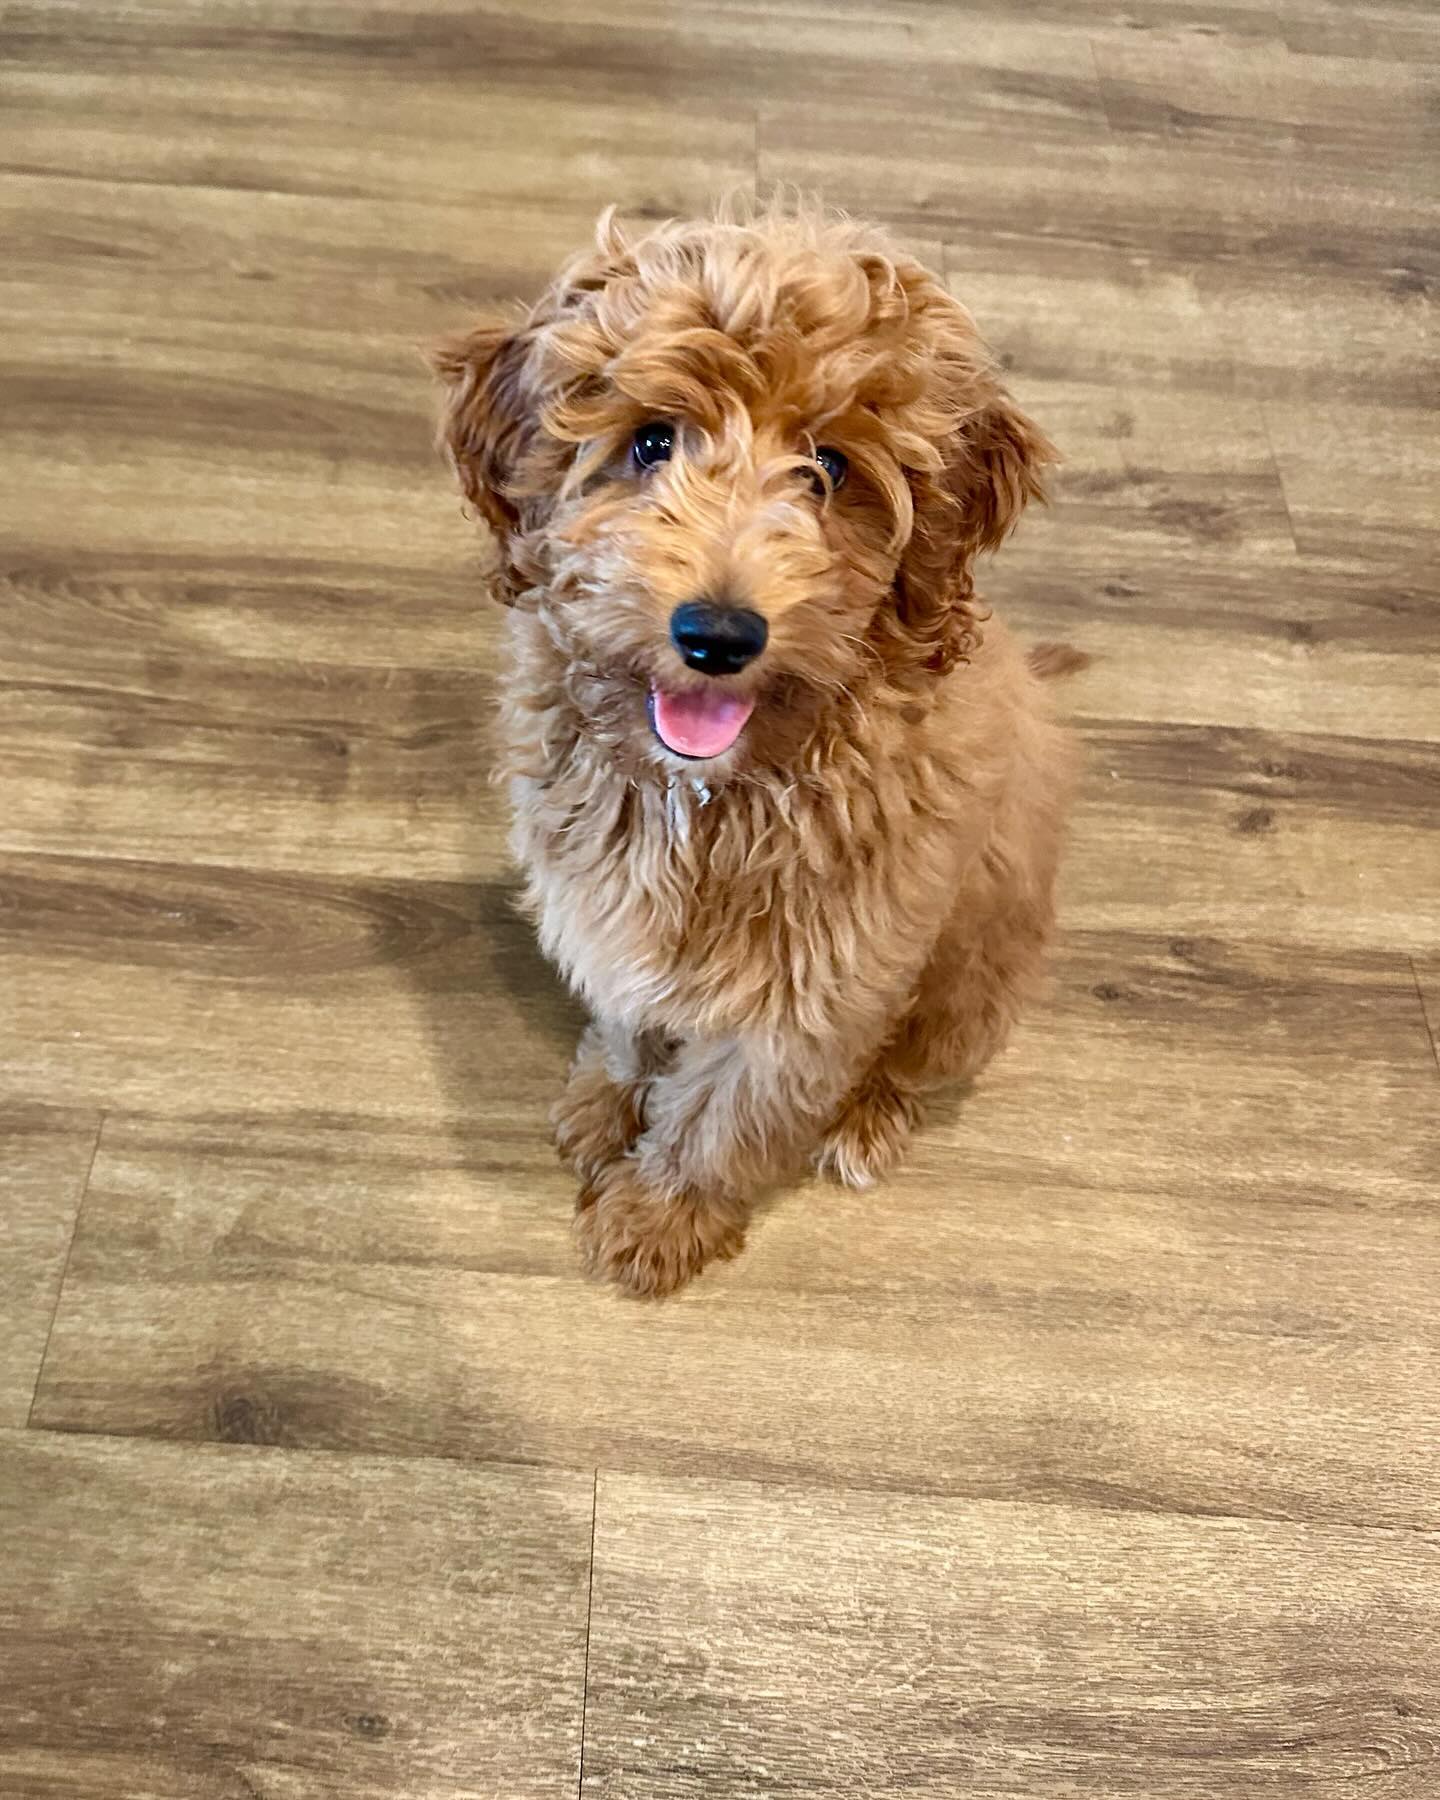 Were happy everyday, but happier that it’s finally Friday!

I love you my little Ollie Bear, you are the best gift that has came to me this year!! 🧸
.
.
.
#goldendoodlelover #puppylove #ollie #bear #allsmiles #goodenergy #friday